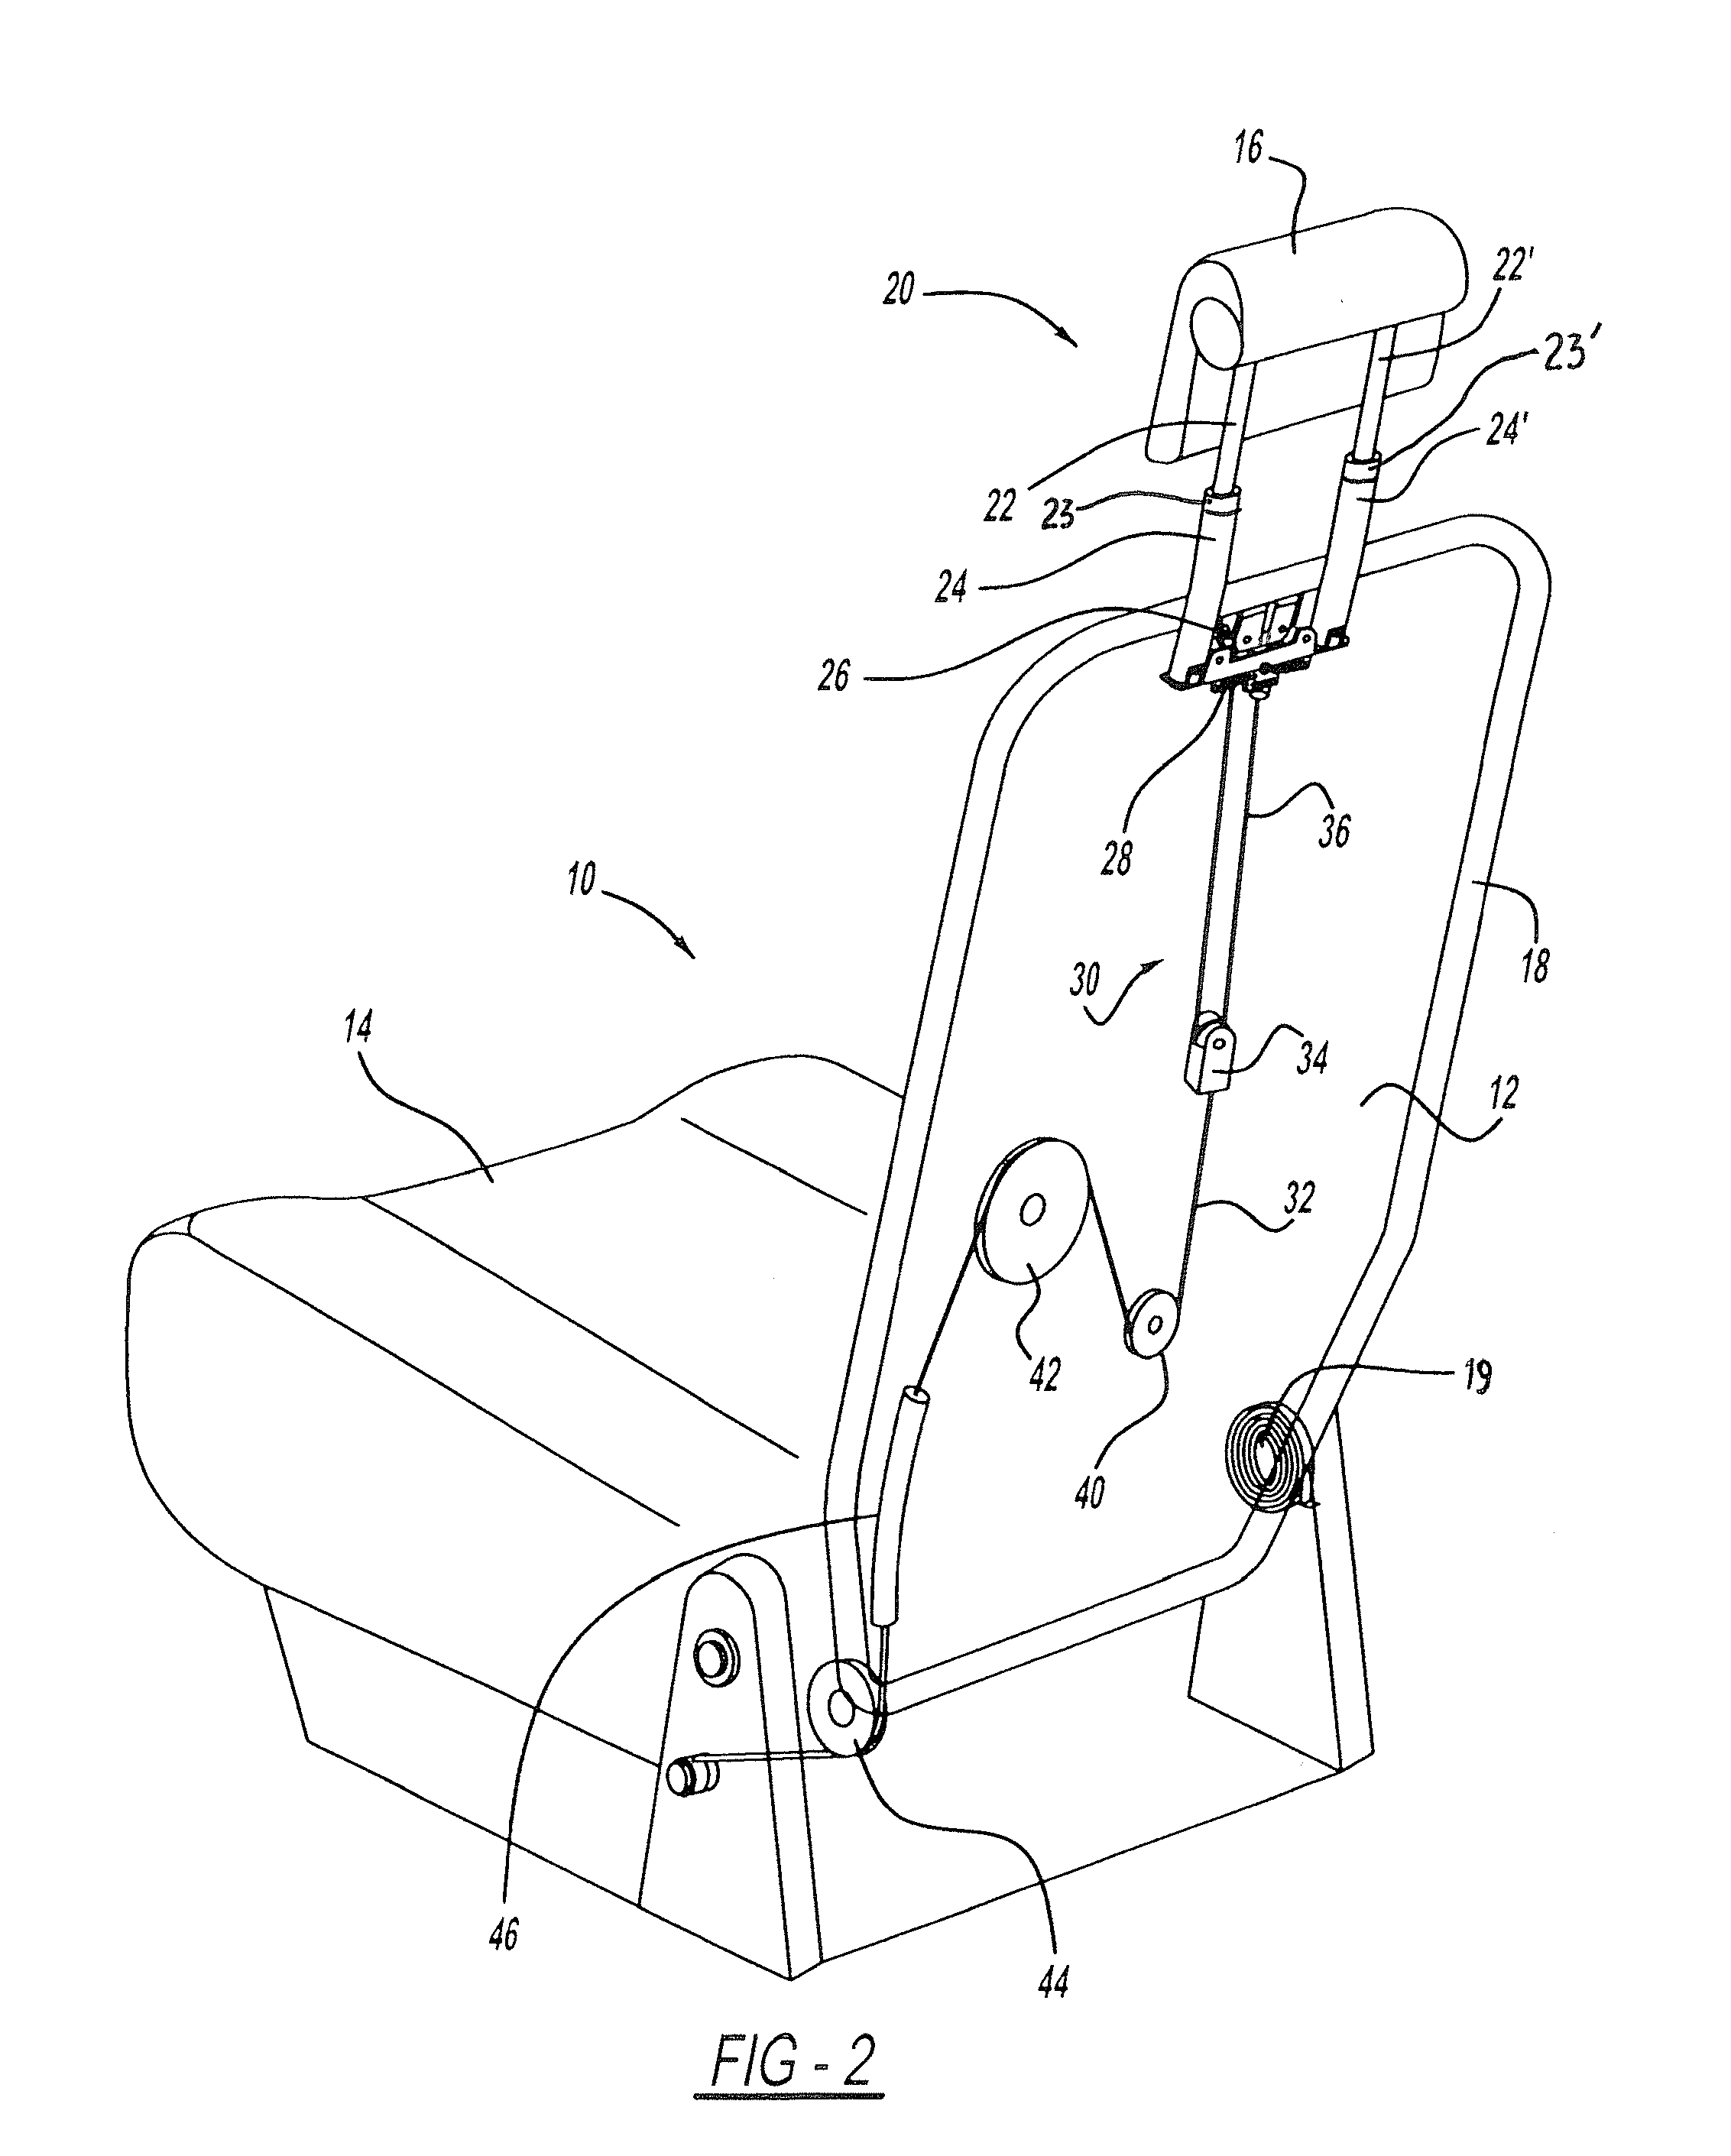 System for seat-actuated head rest extension and retraction